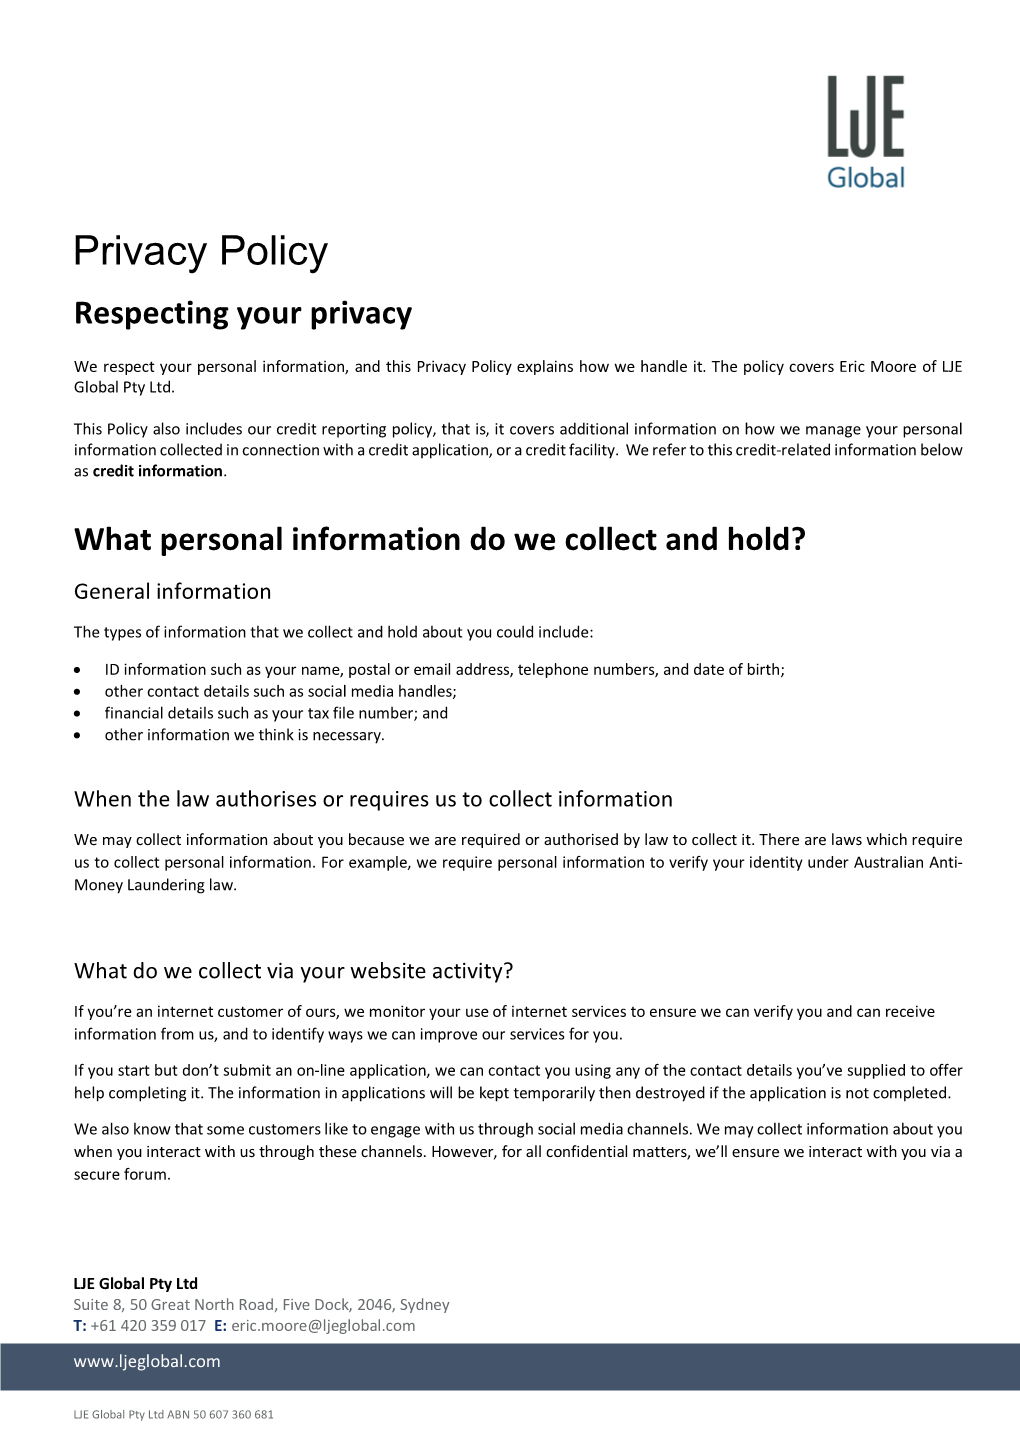 Privacy Policy Respecting Your Privacy